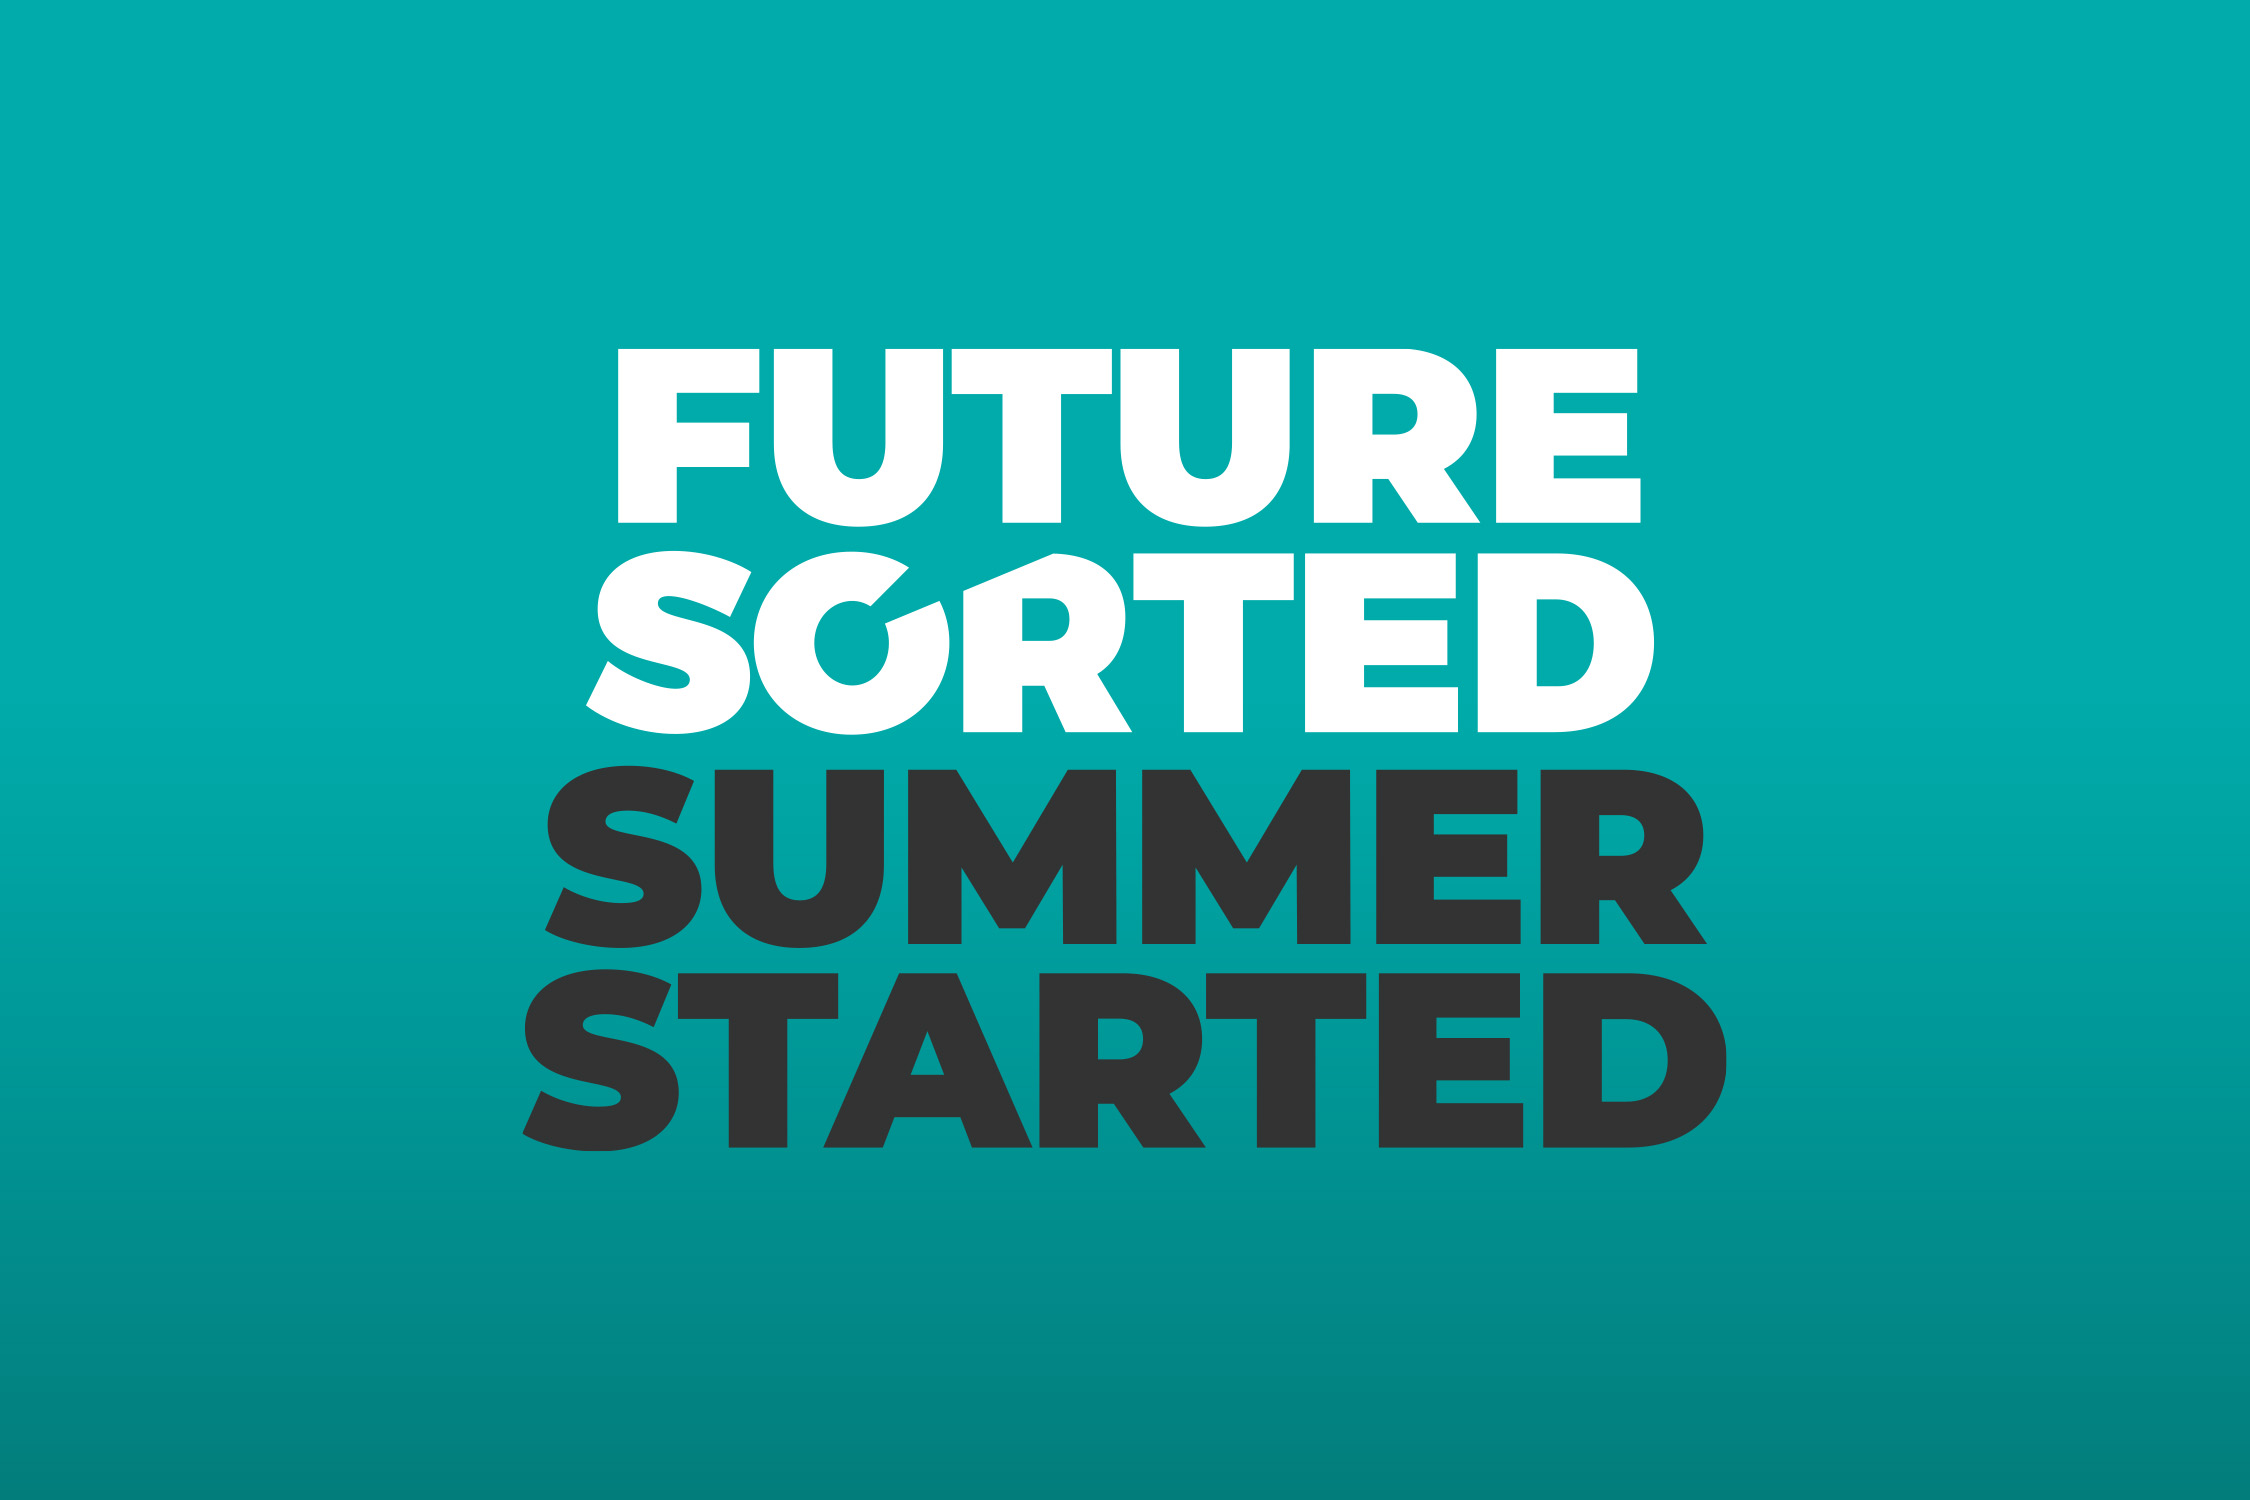 Future sorted for EKC Group’s student recruitment campaign